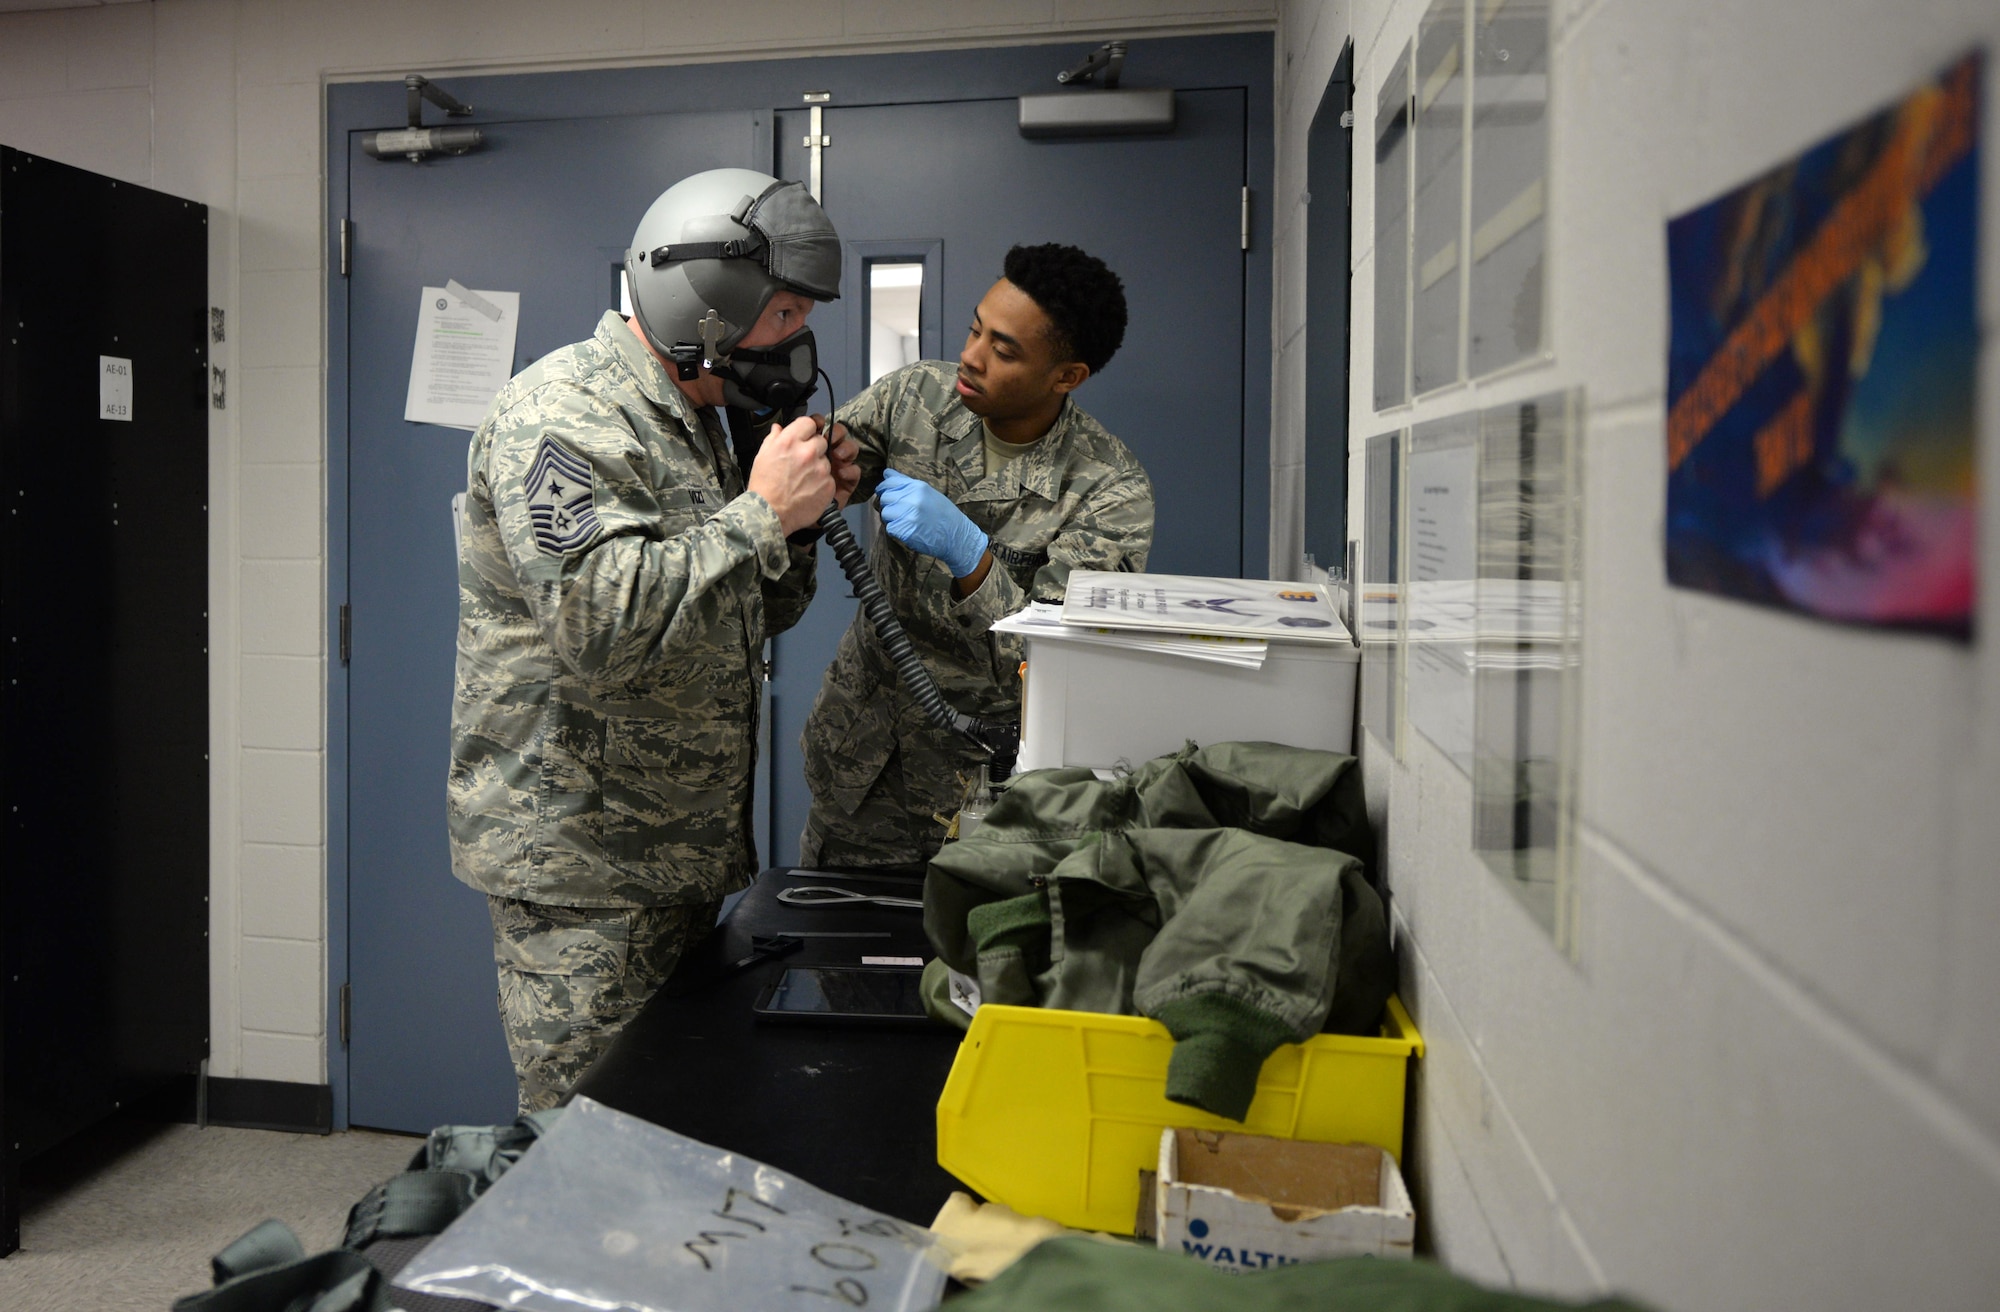 Airman 1st Class Trevor Garrett, a 28th Operations Support Squadron aircrew flight equipment technician, right, fits a gas mask for Chief Master Sgt. Adam Vizi, the 28th Bomb Wing command chief, at Ellsworth Air Force Base, S.D., March 14, 2017. AFE technicians perform a fit test for aircrew to ensure the mask is secure and won’t have any air leaks. (U.S. Air Force photo by Senior Airman Denise Jenson)